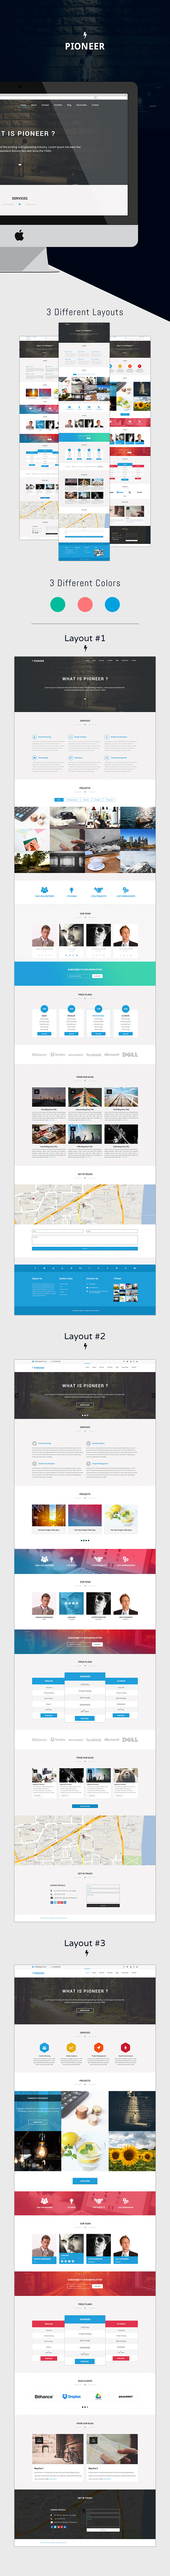 free psd template Website landing page free psd